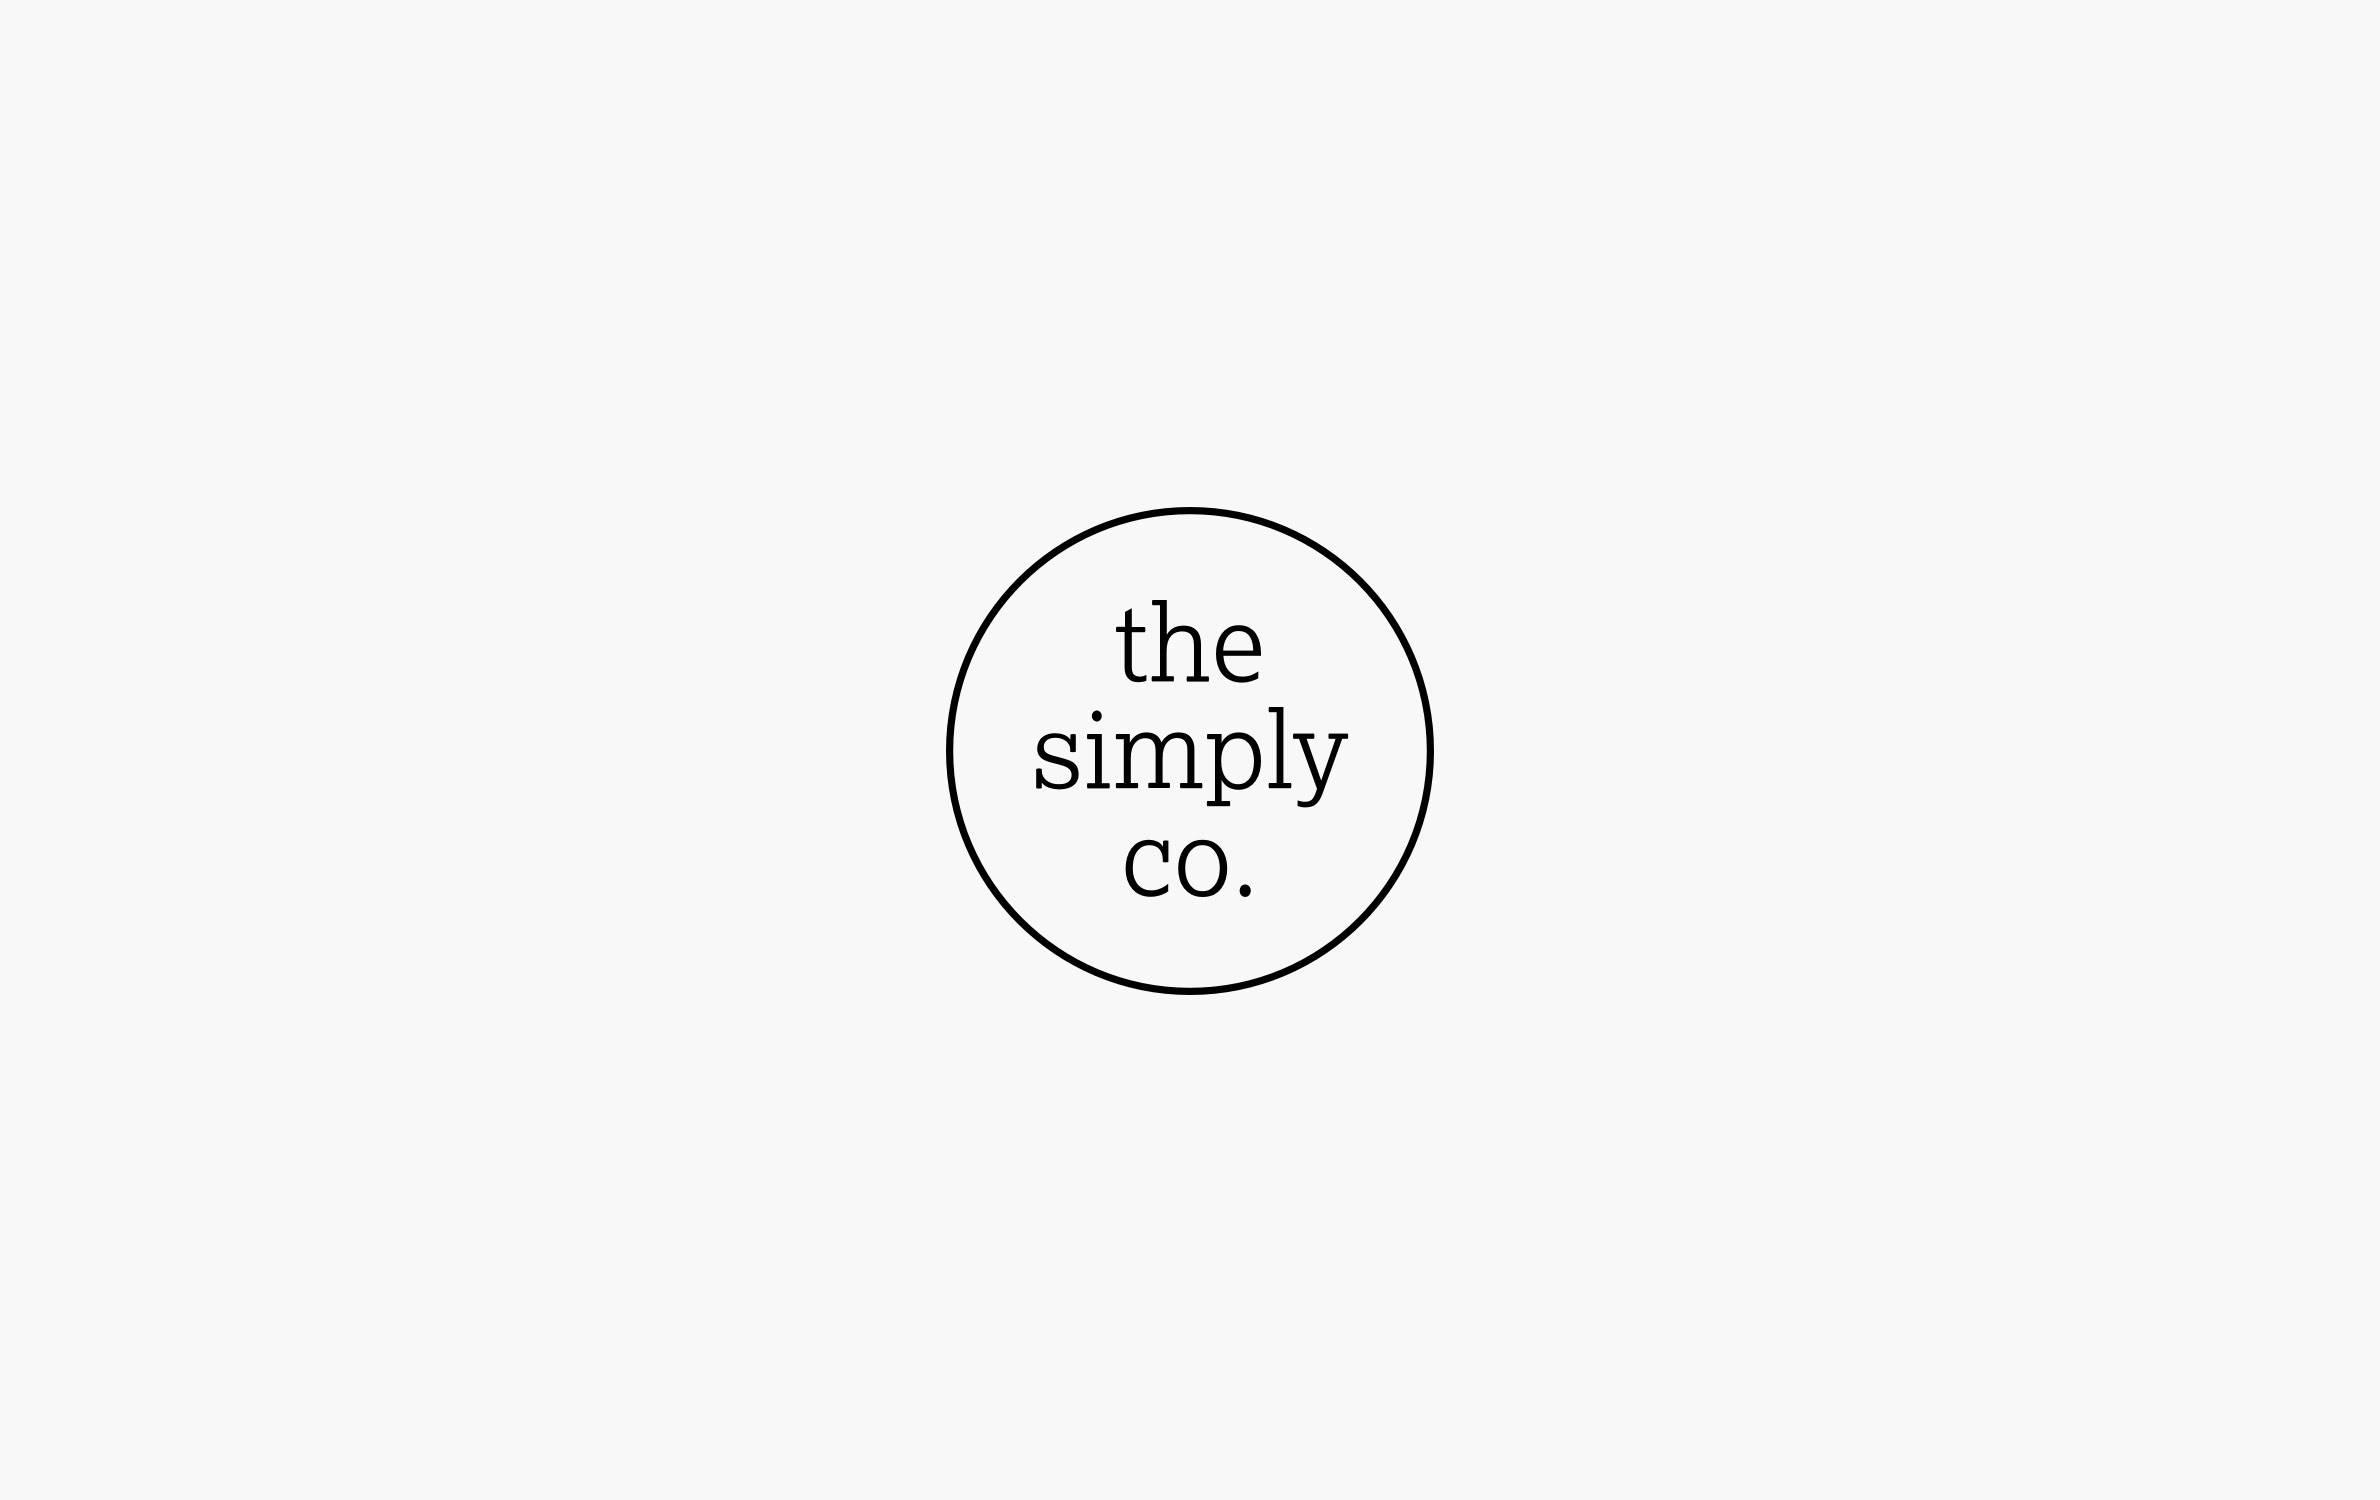 The Simple Co. logo